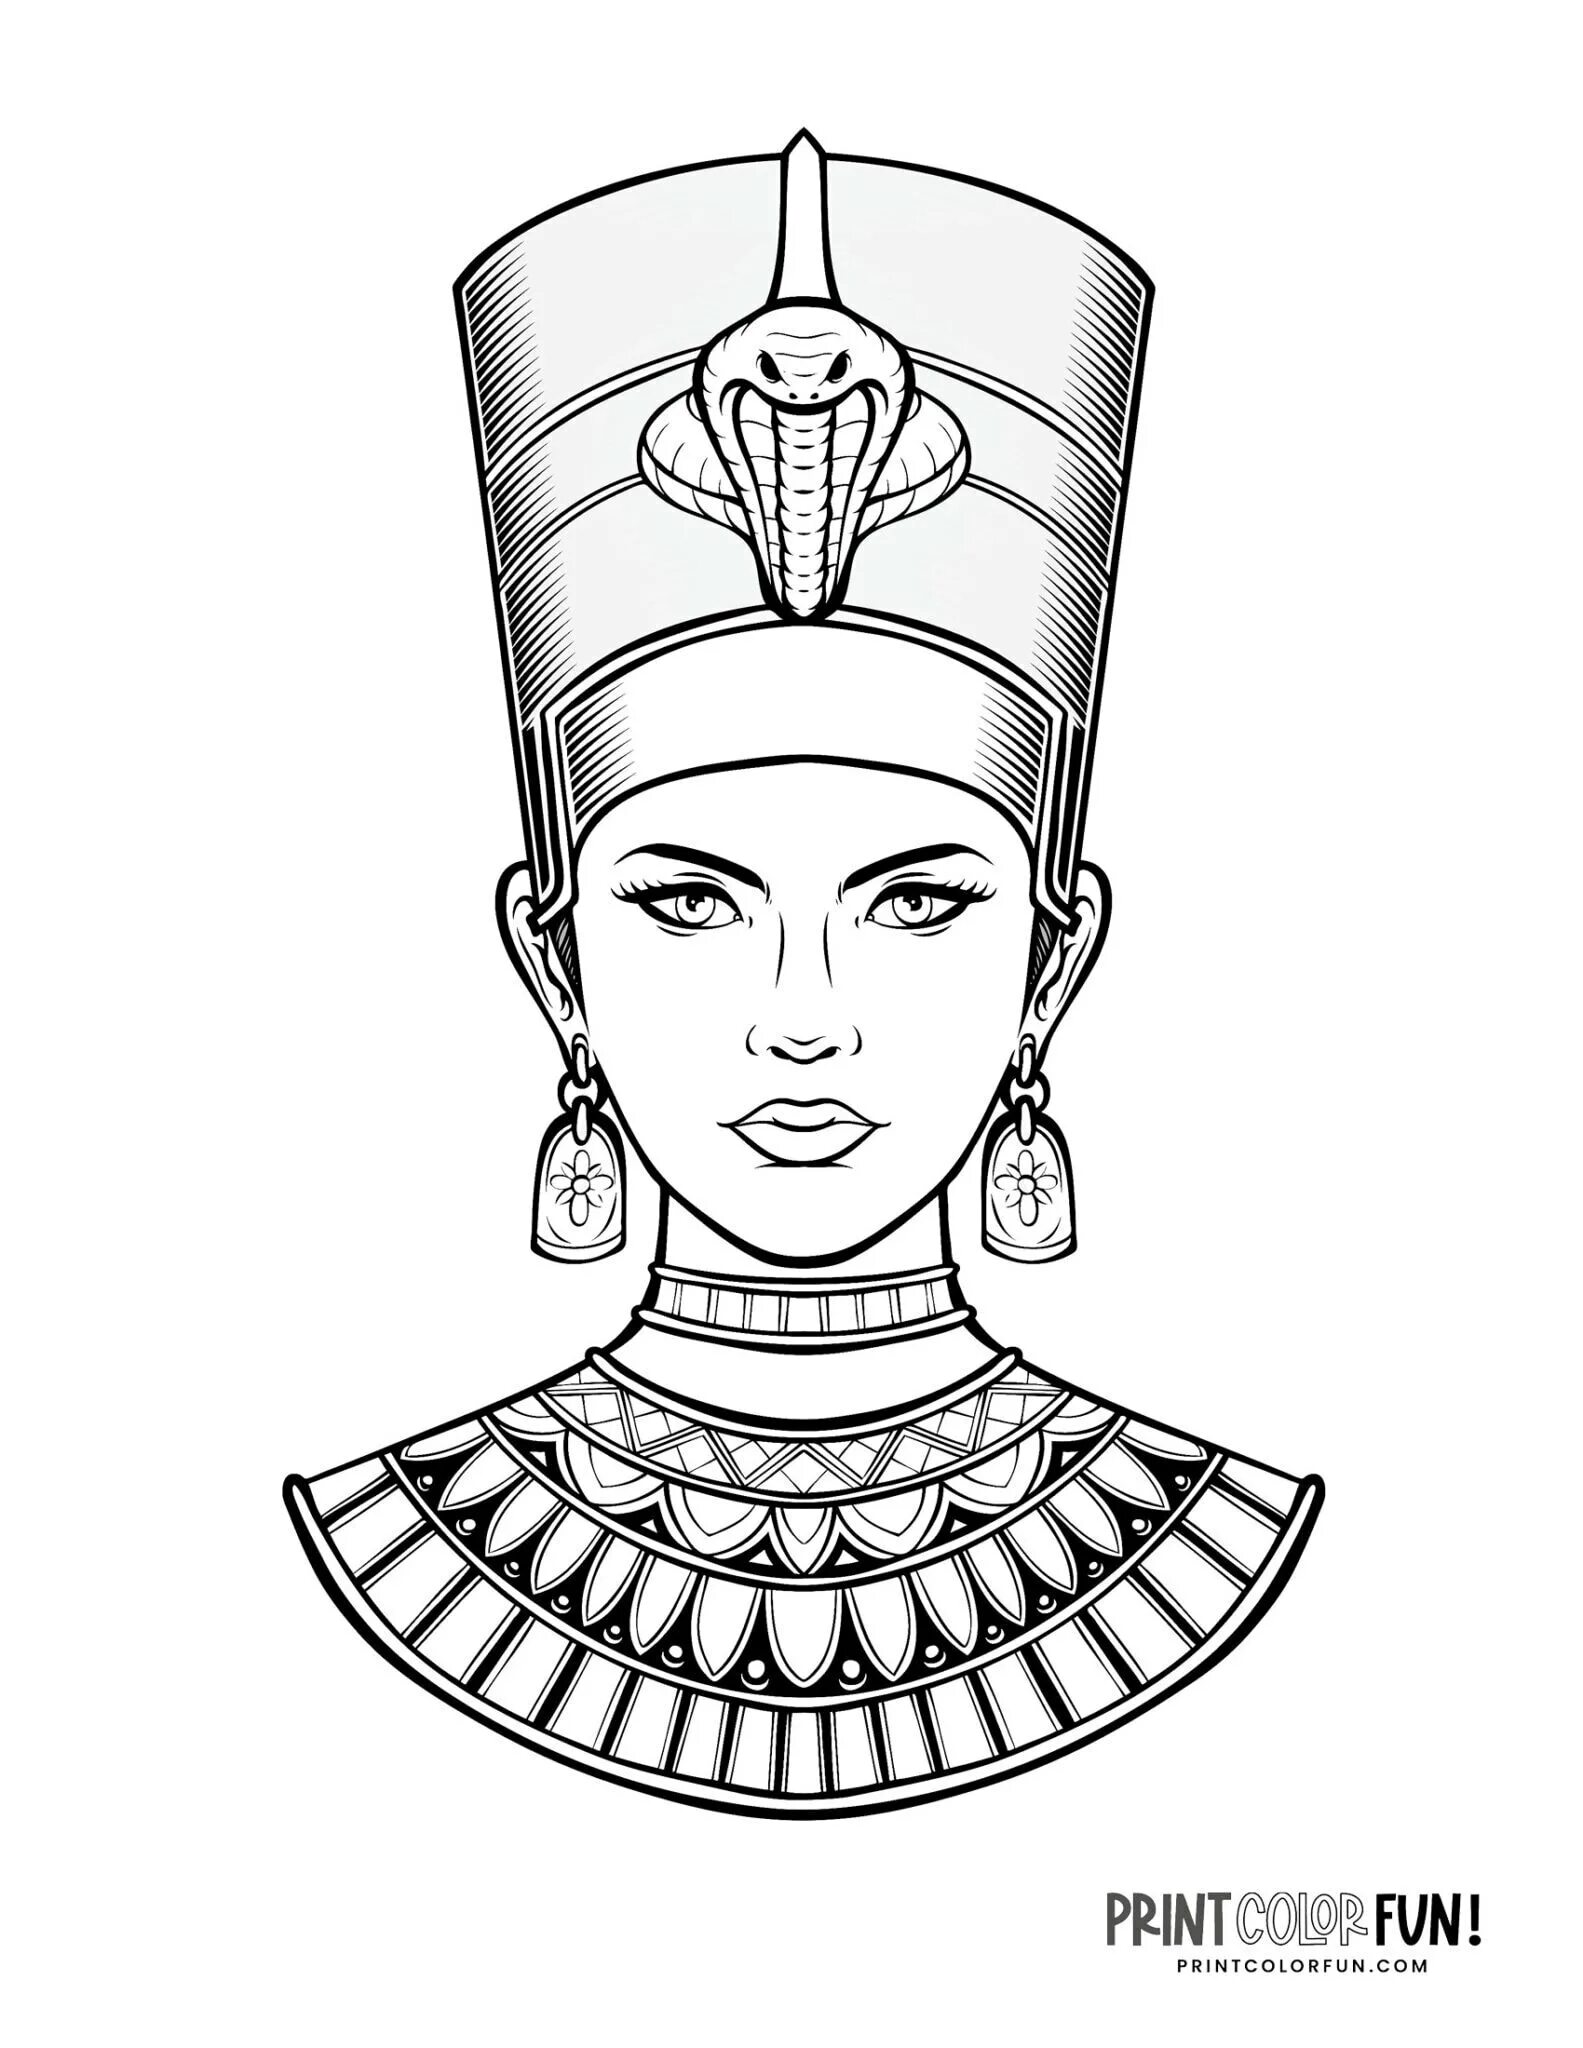 Nefertiti coloring with rich hues